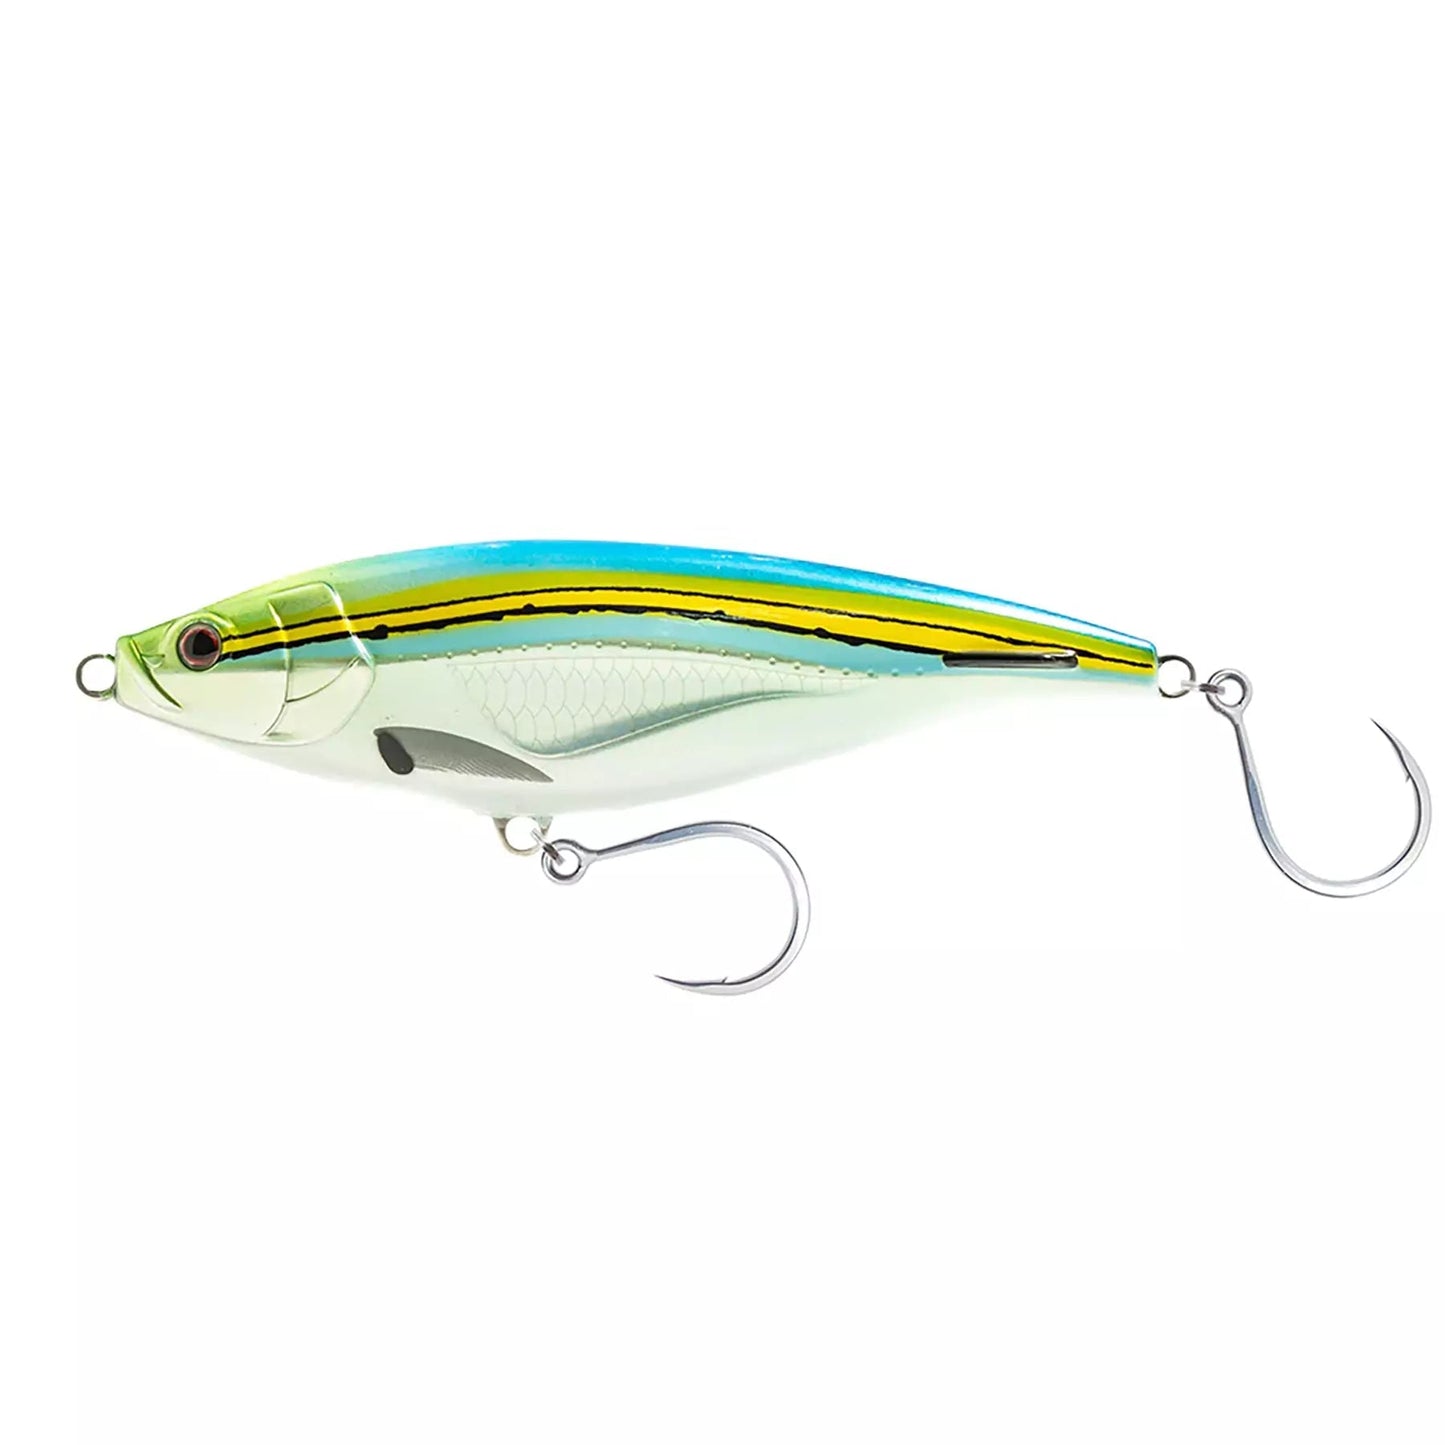 Nomad Design Madscad-Lure - Poppers, Stickbaits & Pencils-Nomad-150mm-Fusilier-Fishing Station